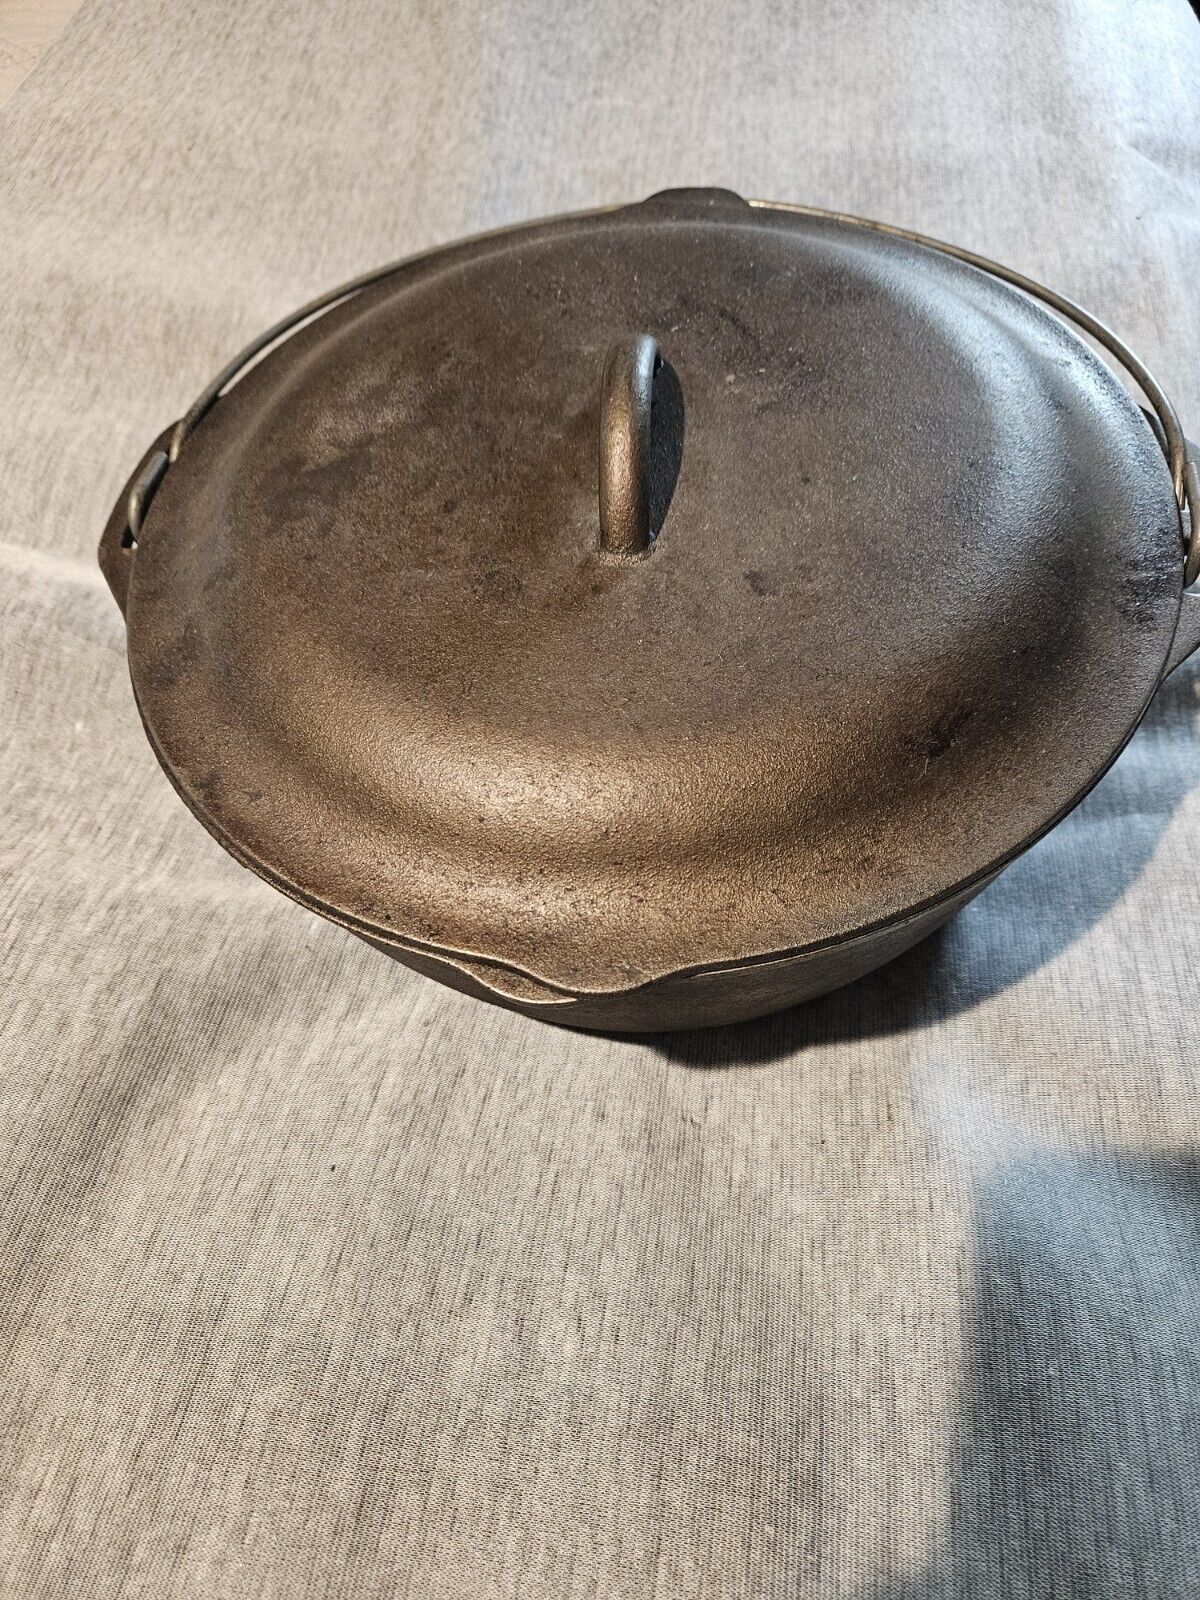 Vintage Lodge Cast Iron #10 Dutch Oven With Lid Made In USA Read Description 